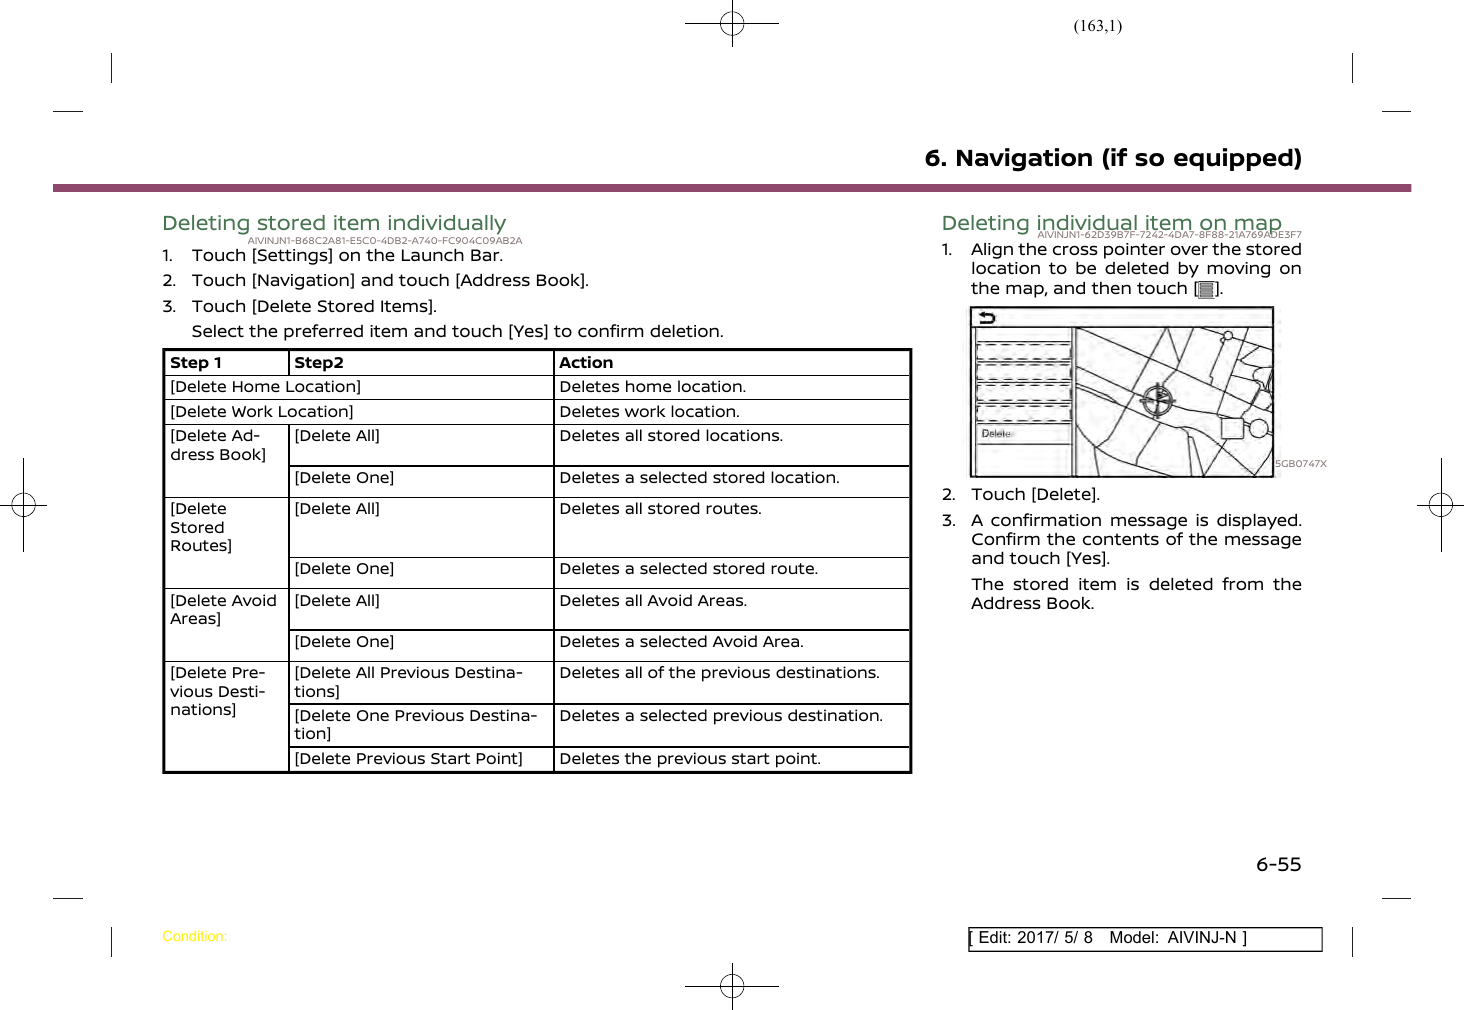 Page 163 of Robert Bosch Car Multimedia AIVICMFB0 Navigation System with Bluetooth and WLAN User Manual